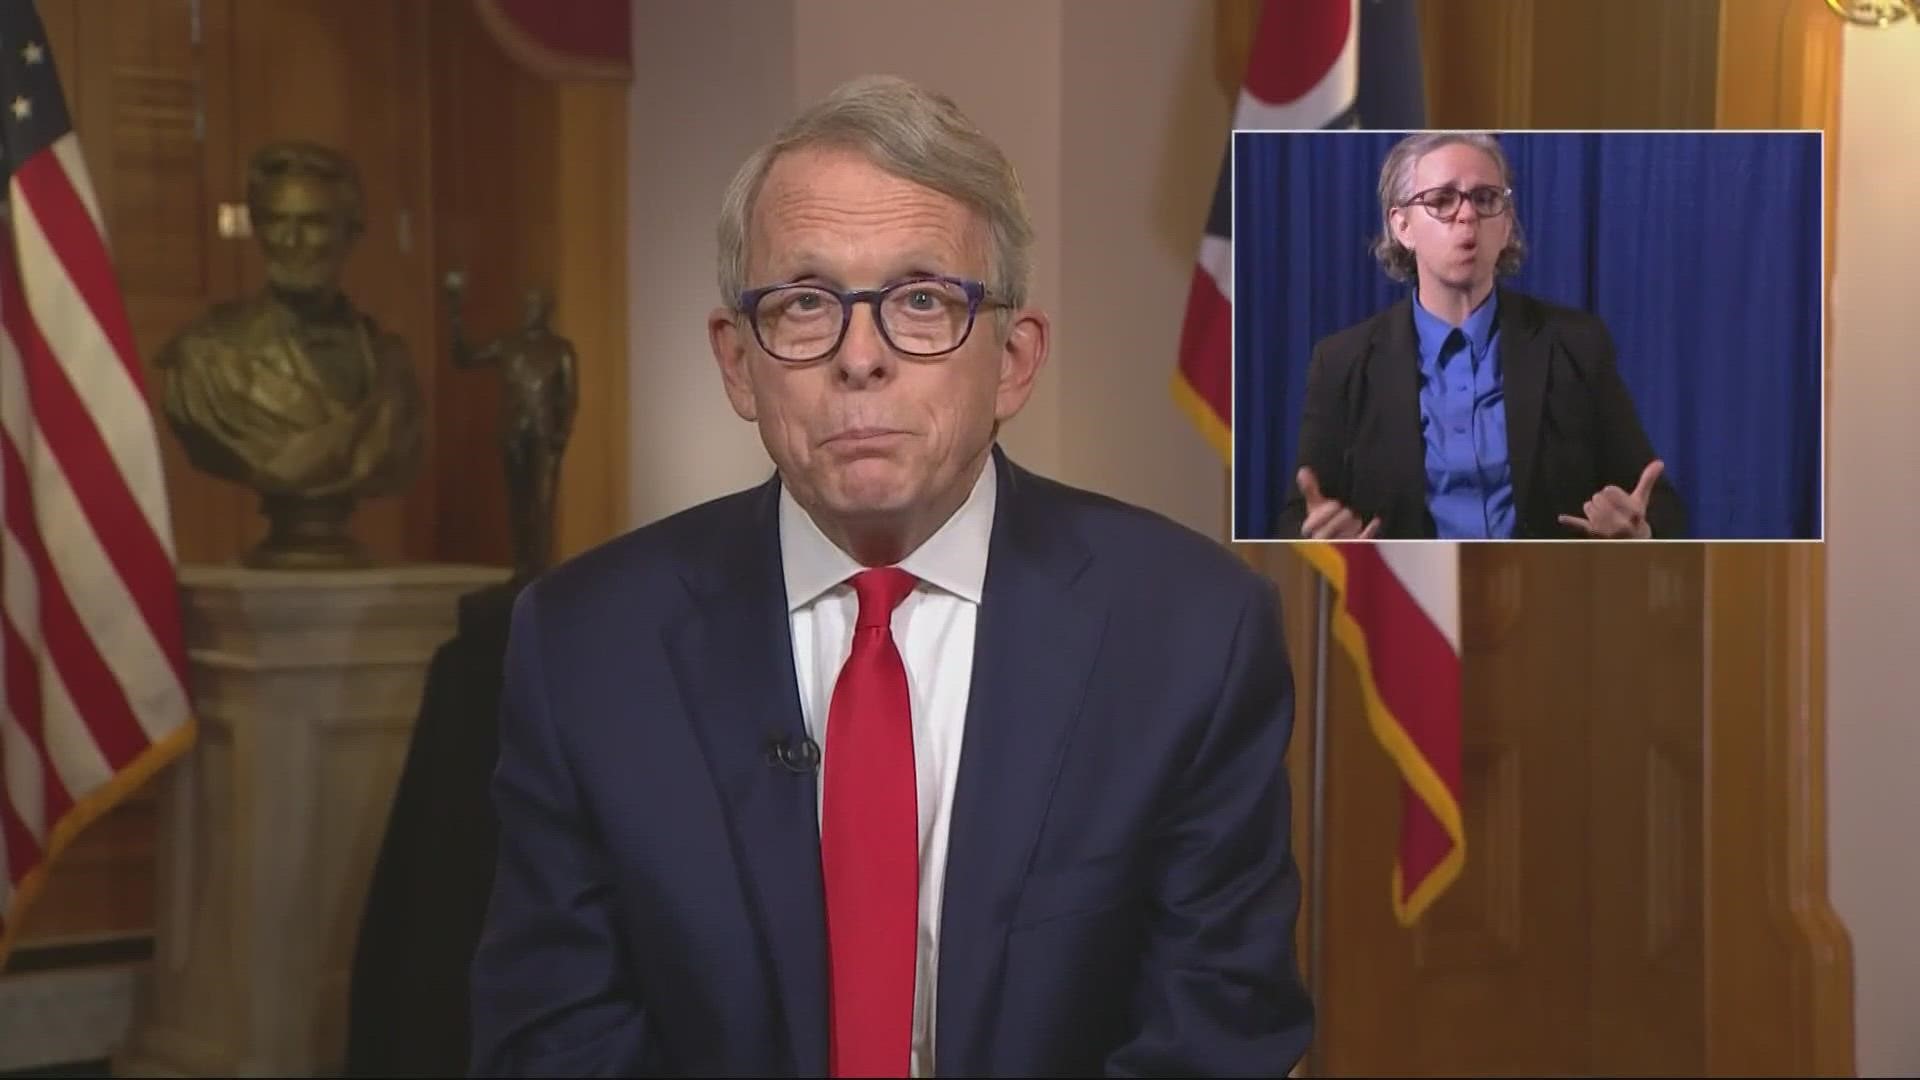 Gov. Mike DeWine's address on Wednesday night began with a clear statement: Ohio has reached the most critical point in the battle against COVID-19.